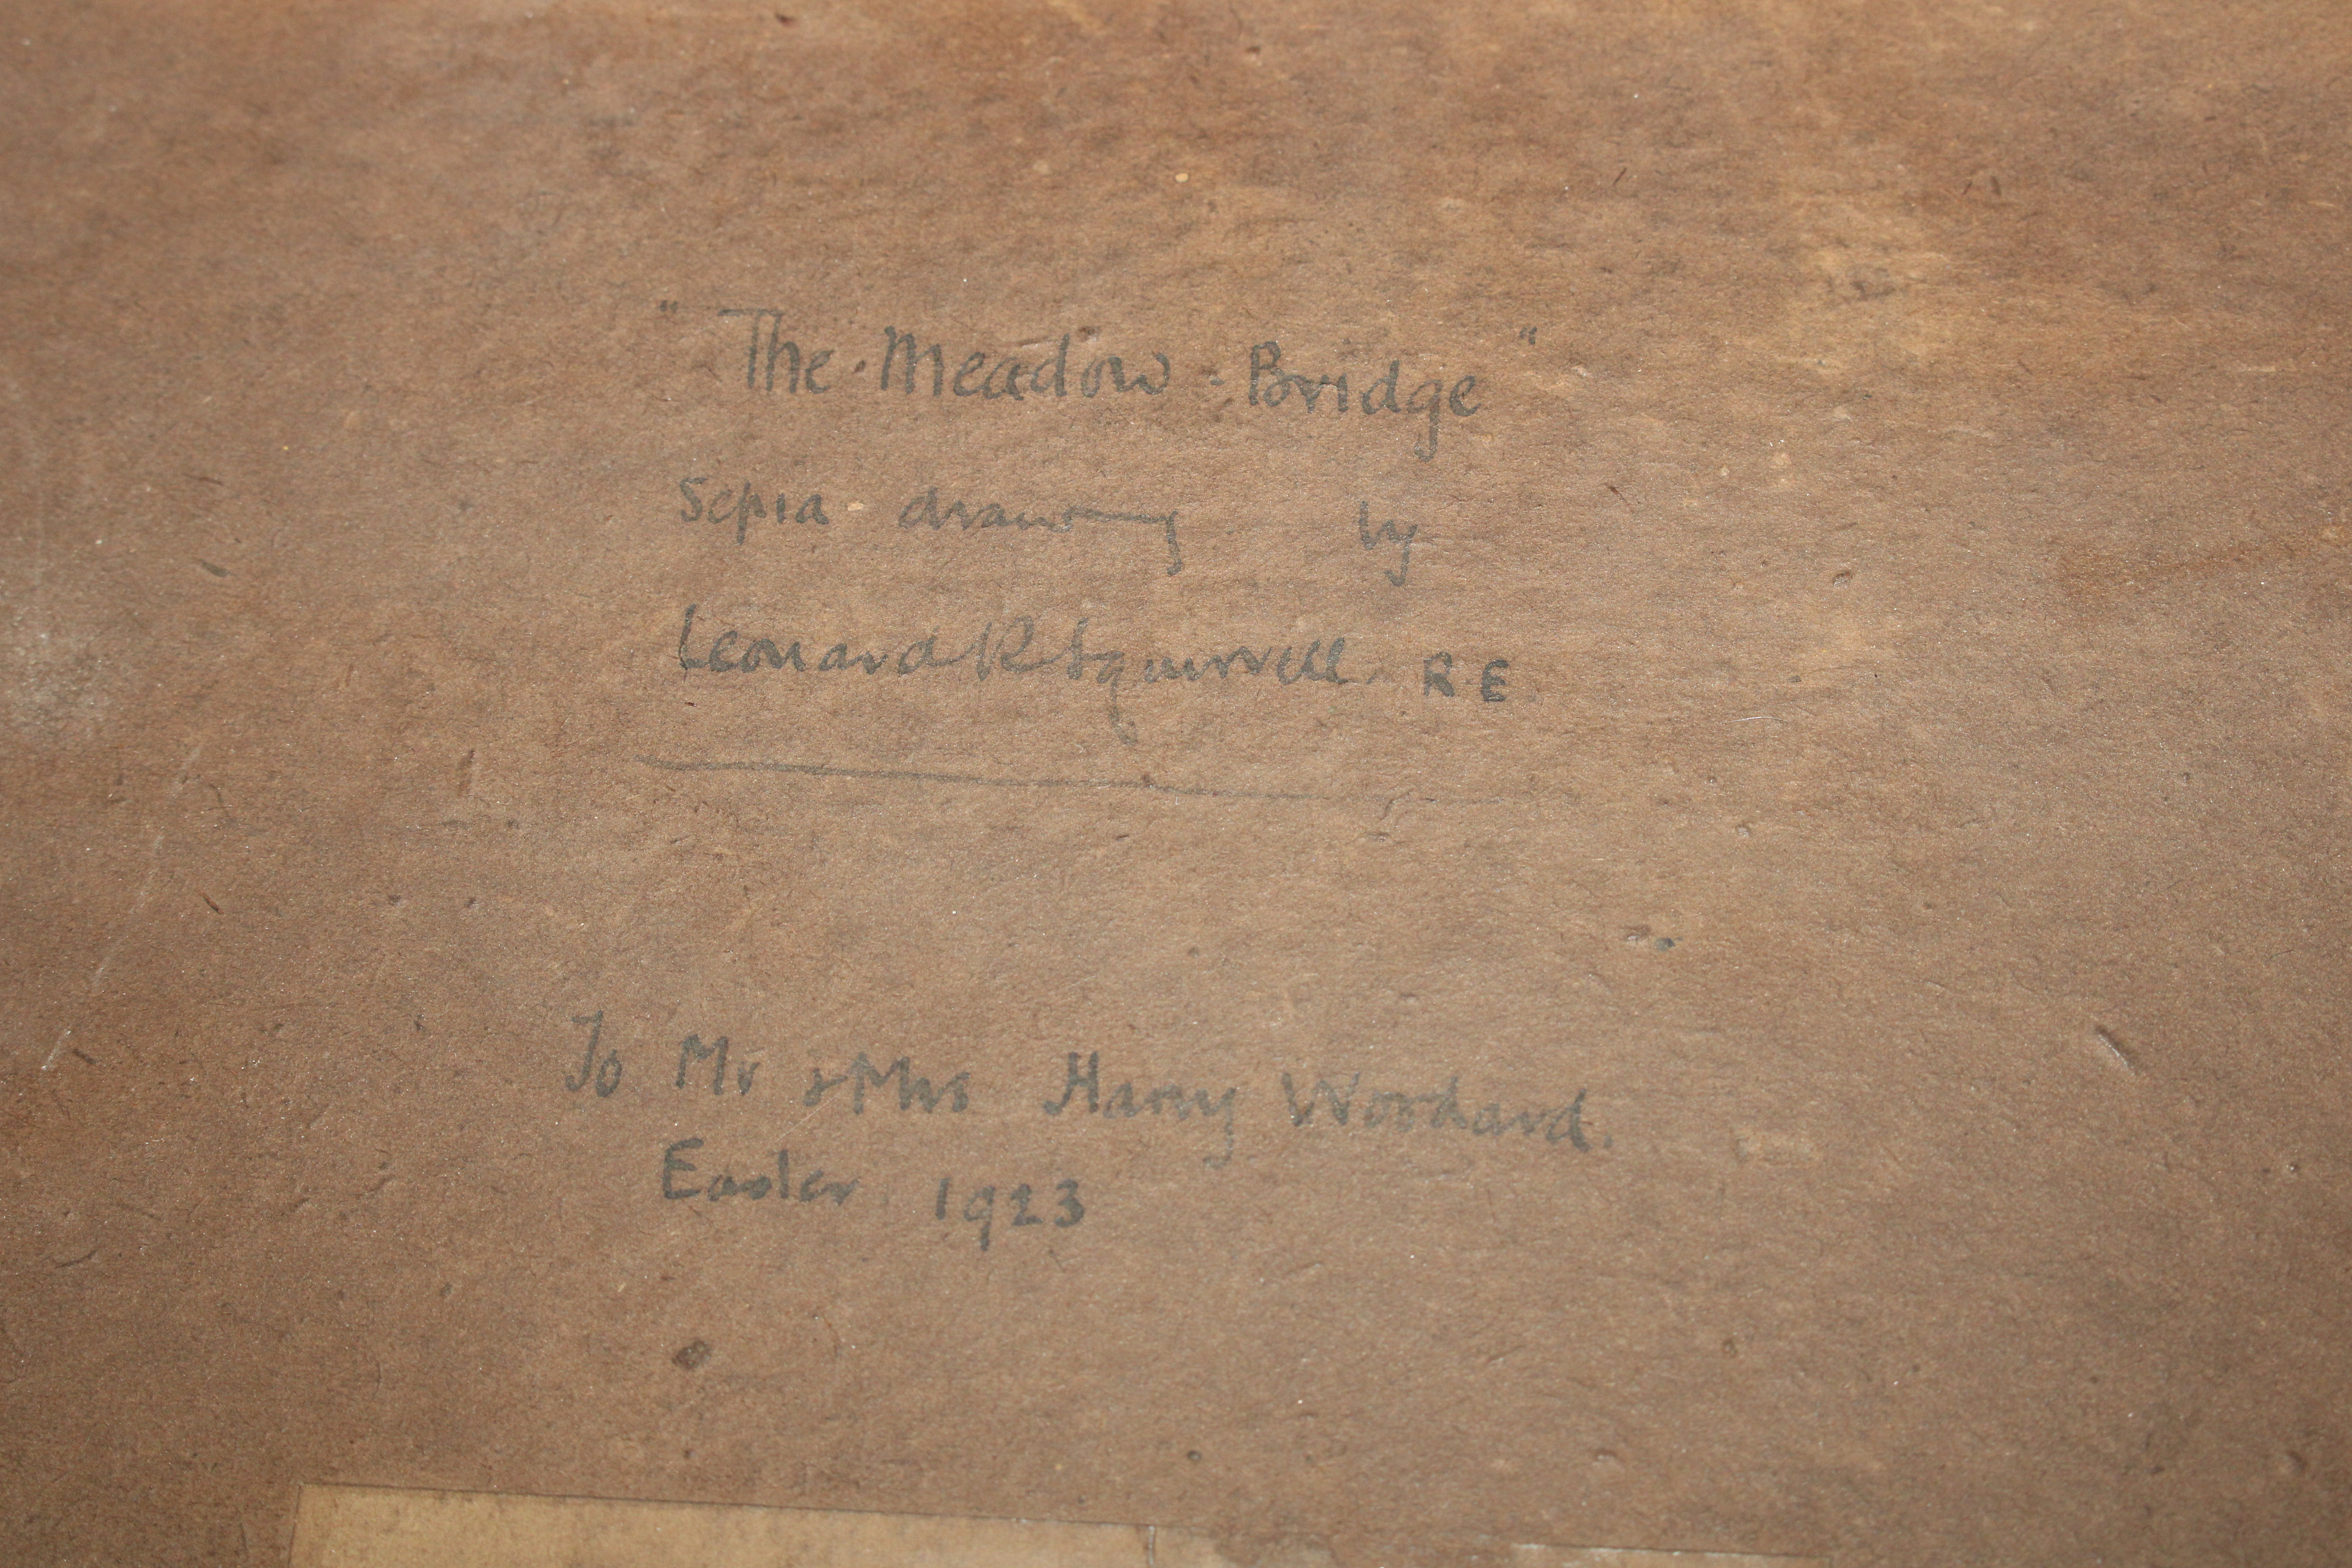 Leonard Russell Squirrell, "A Meadow Bridge" signe - Image 5 of 6